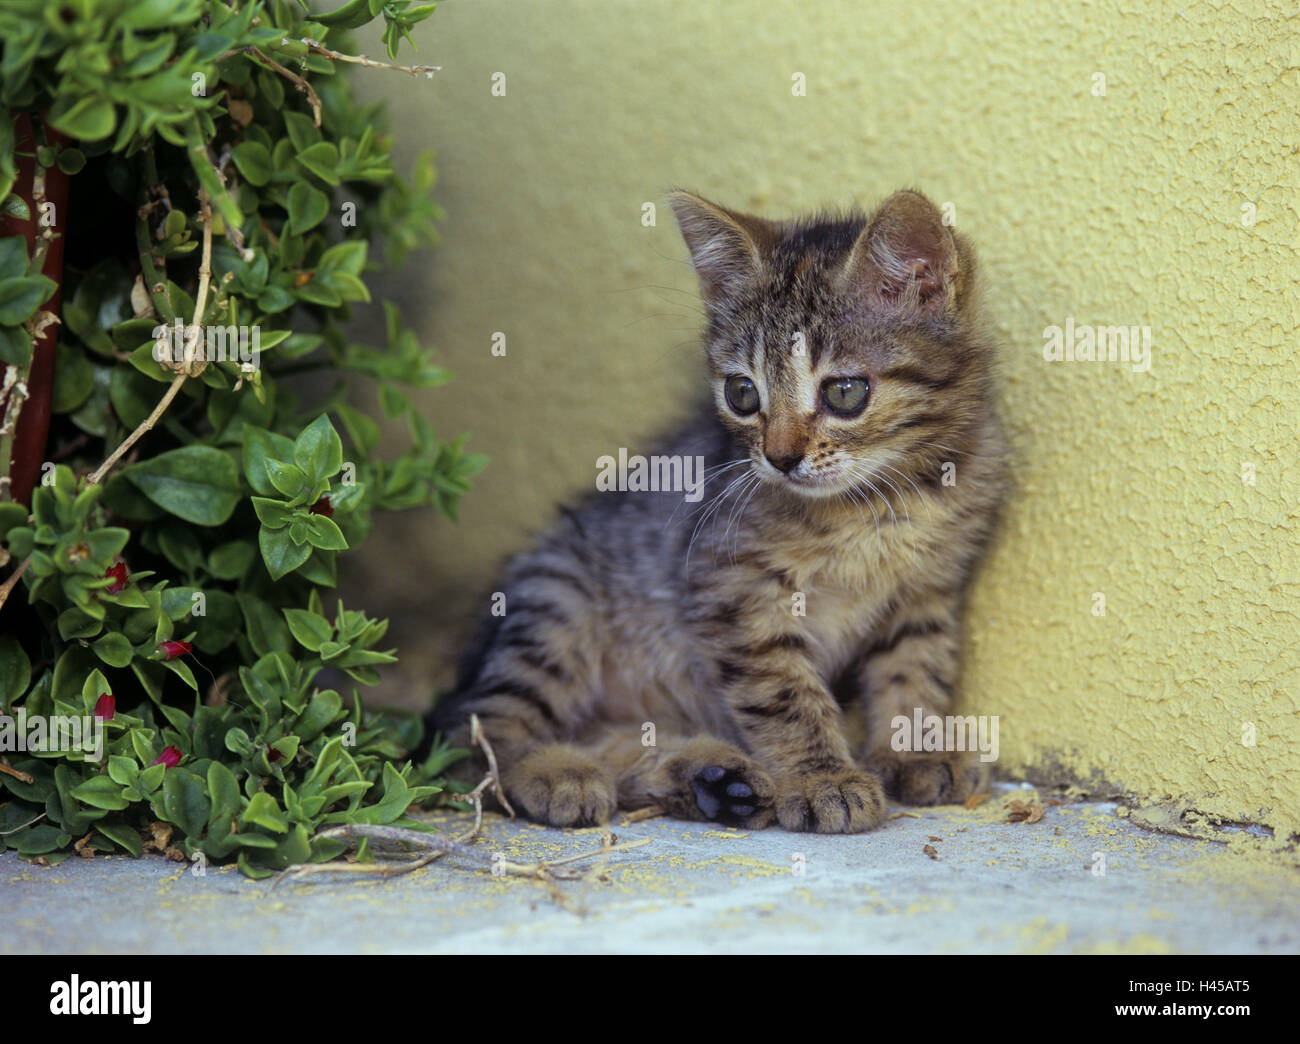 mammal, pet, young, sweet, cute, animal, cat, Domestic cat, young animal, animal child, curiosity, carefully, wall, Stock Photo